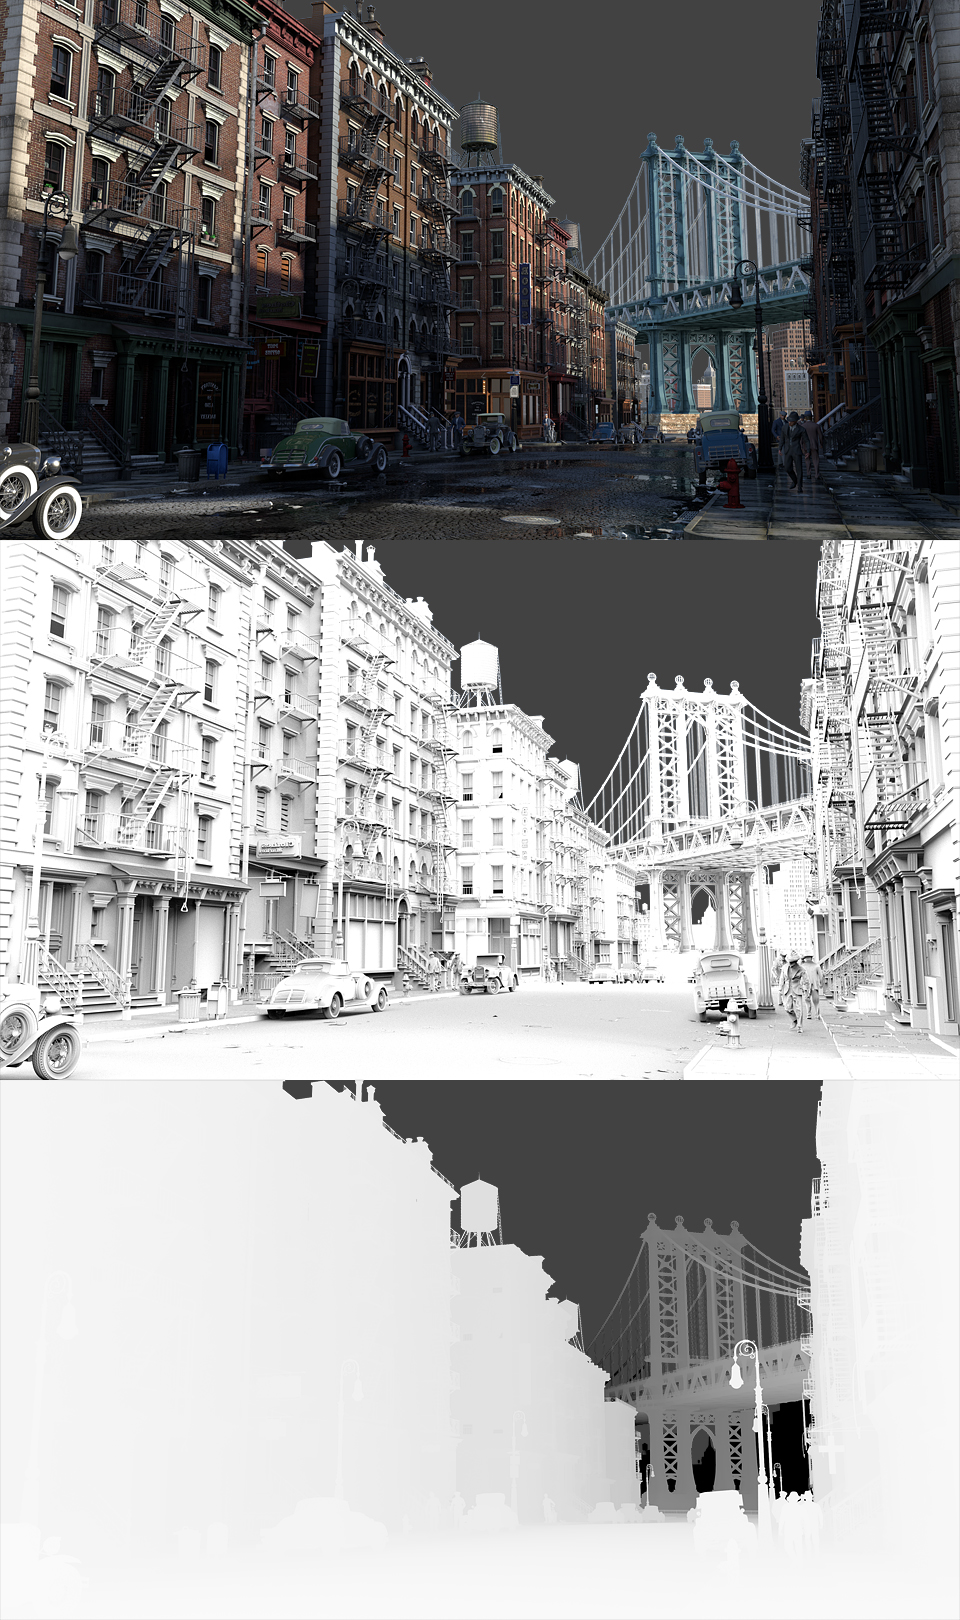 Making-of “New York in the 30’s”